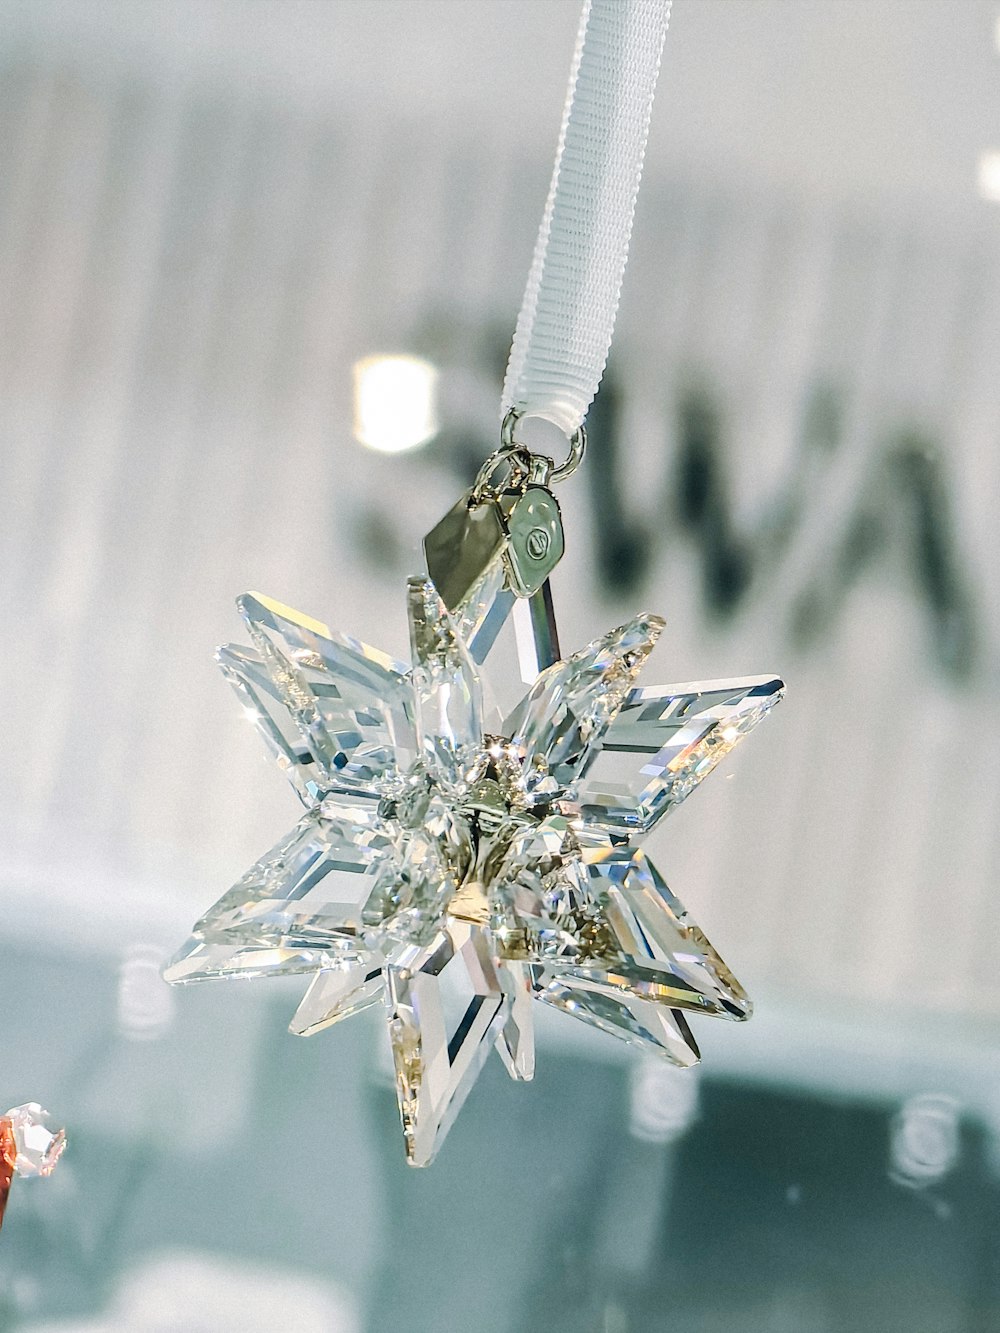 a snowflake ornament hanging from a ceiling